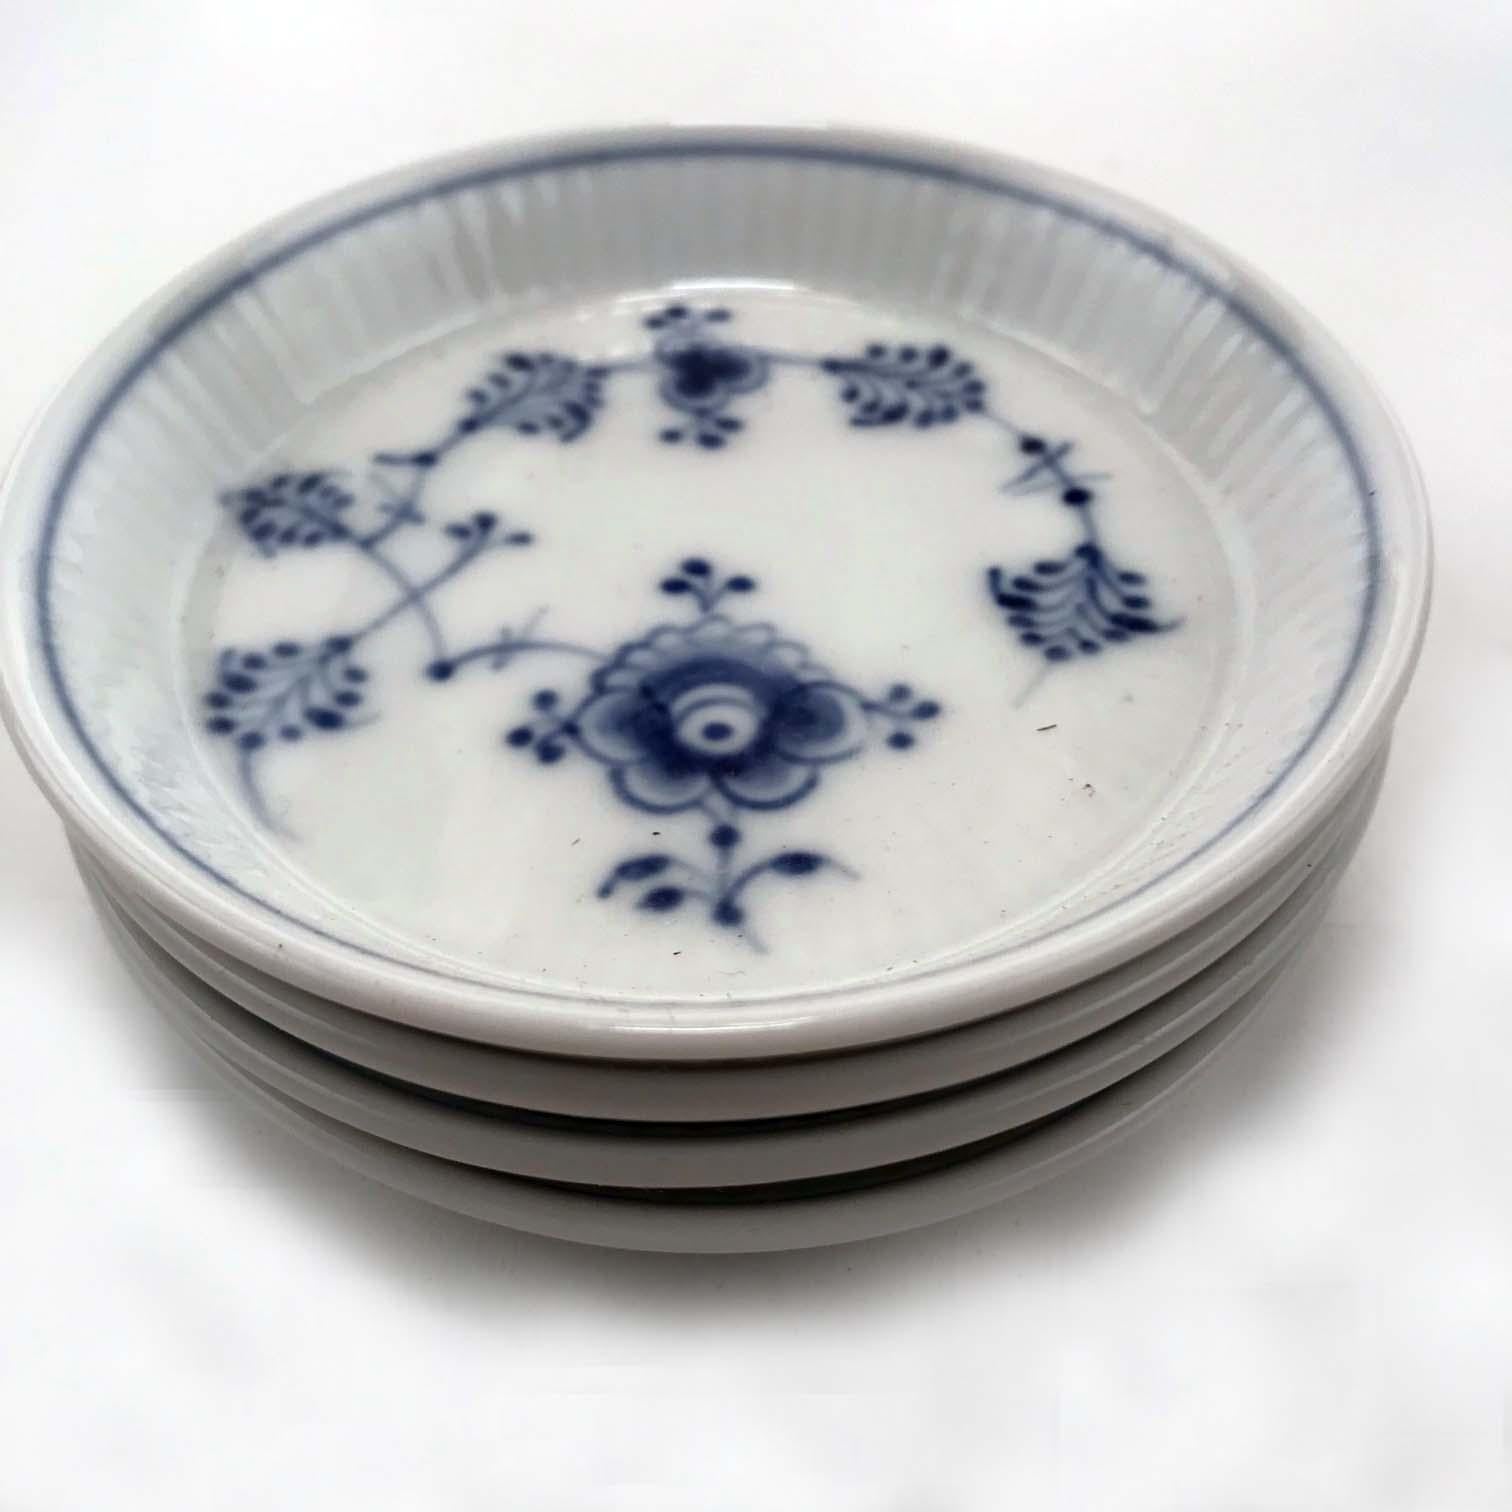 Hand-Painted Royal Copenhagen Breakfast Service for Four in the 